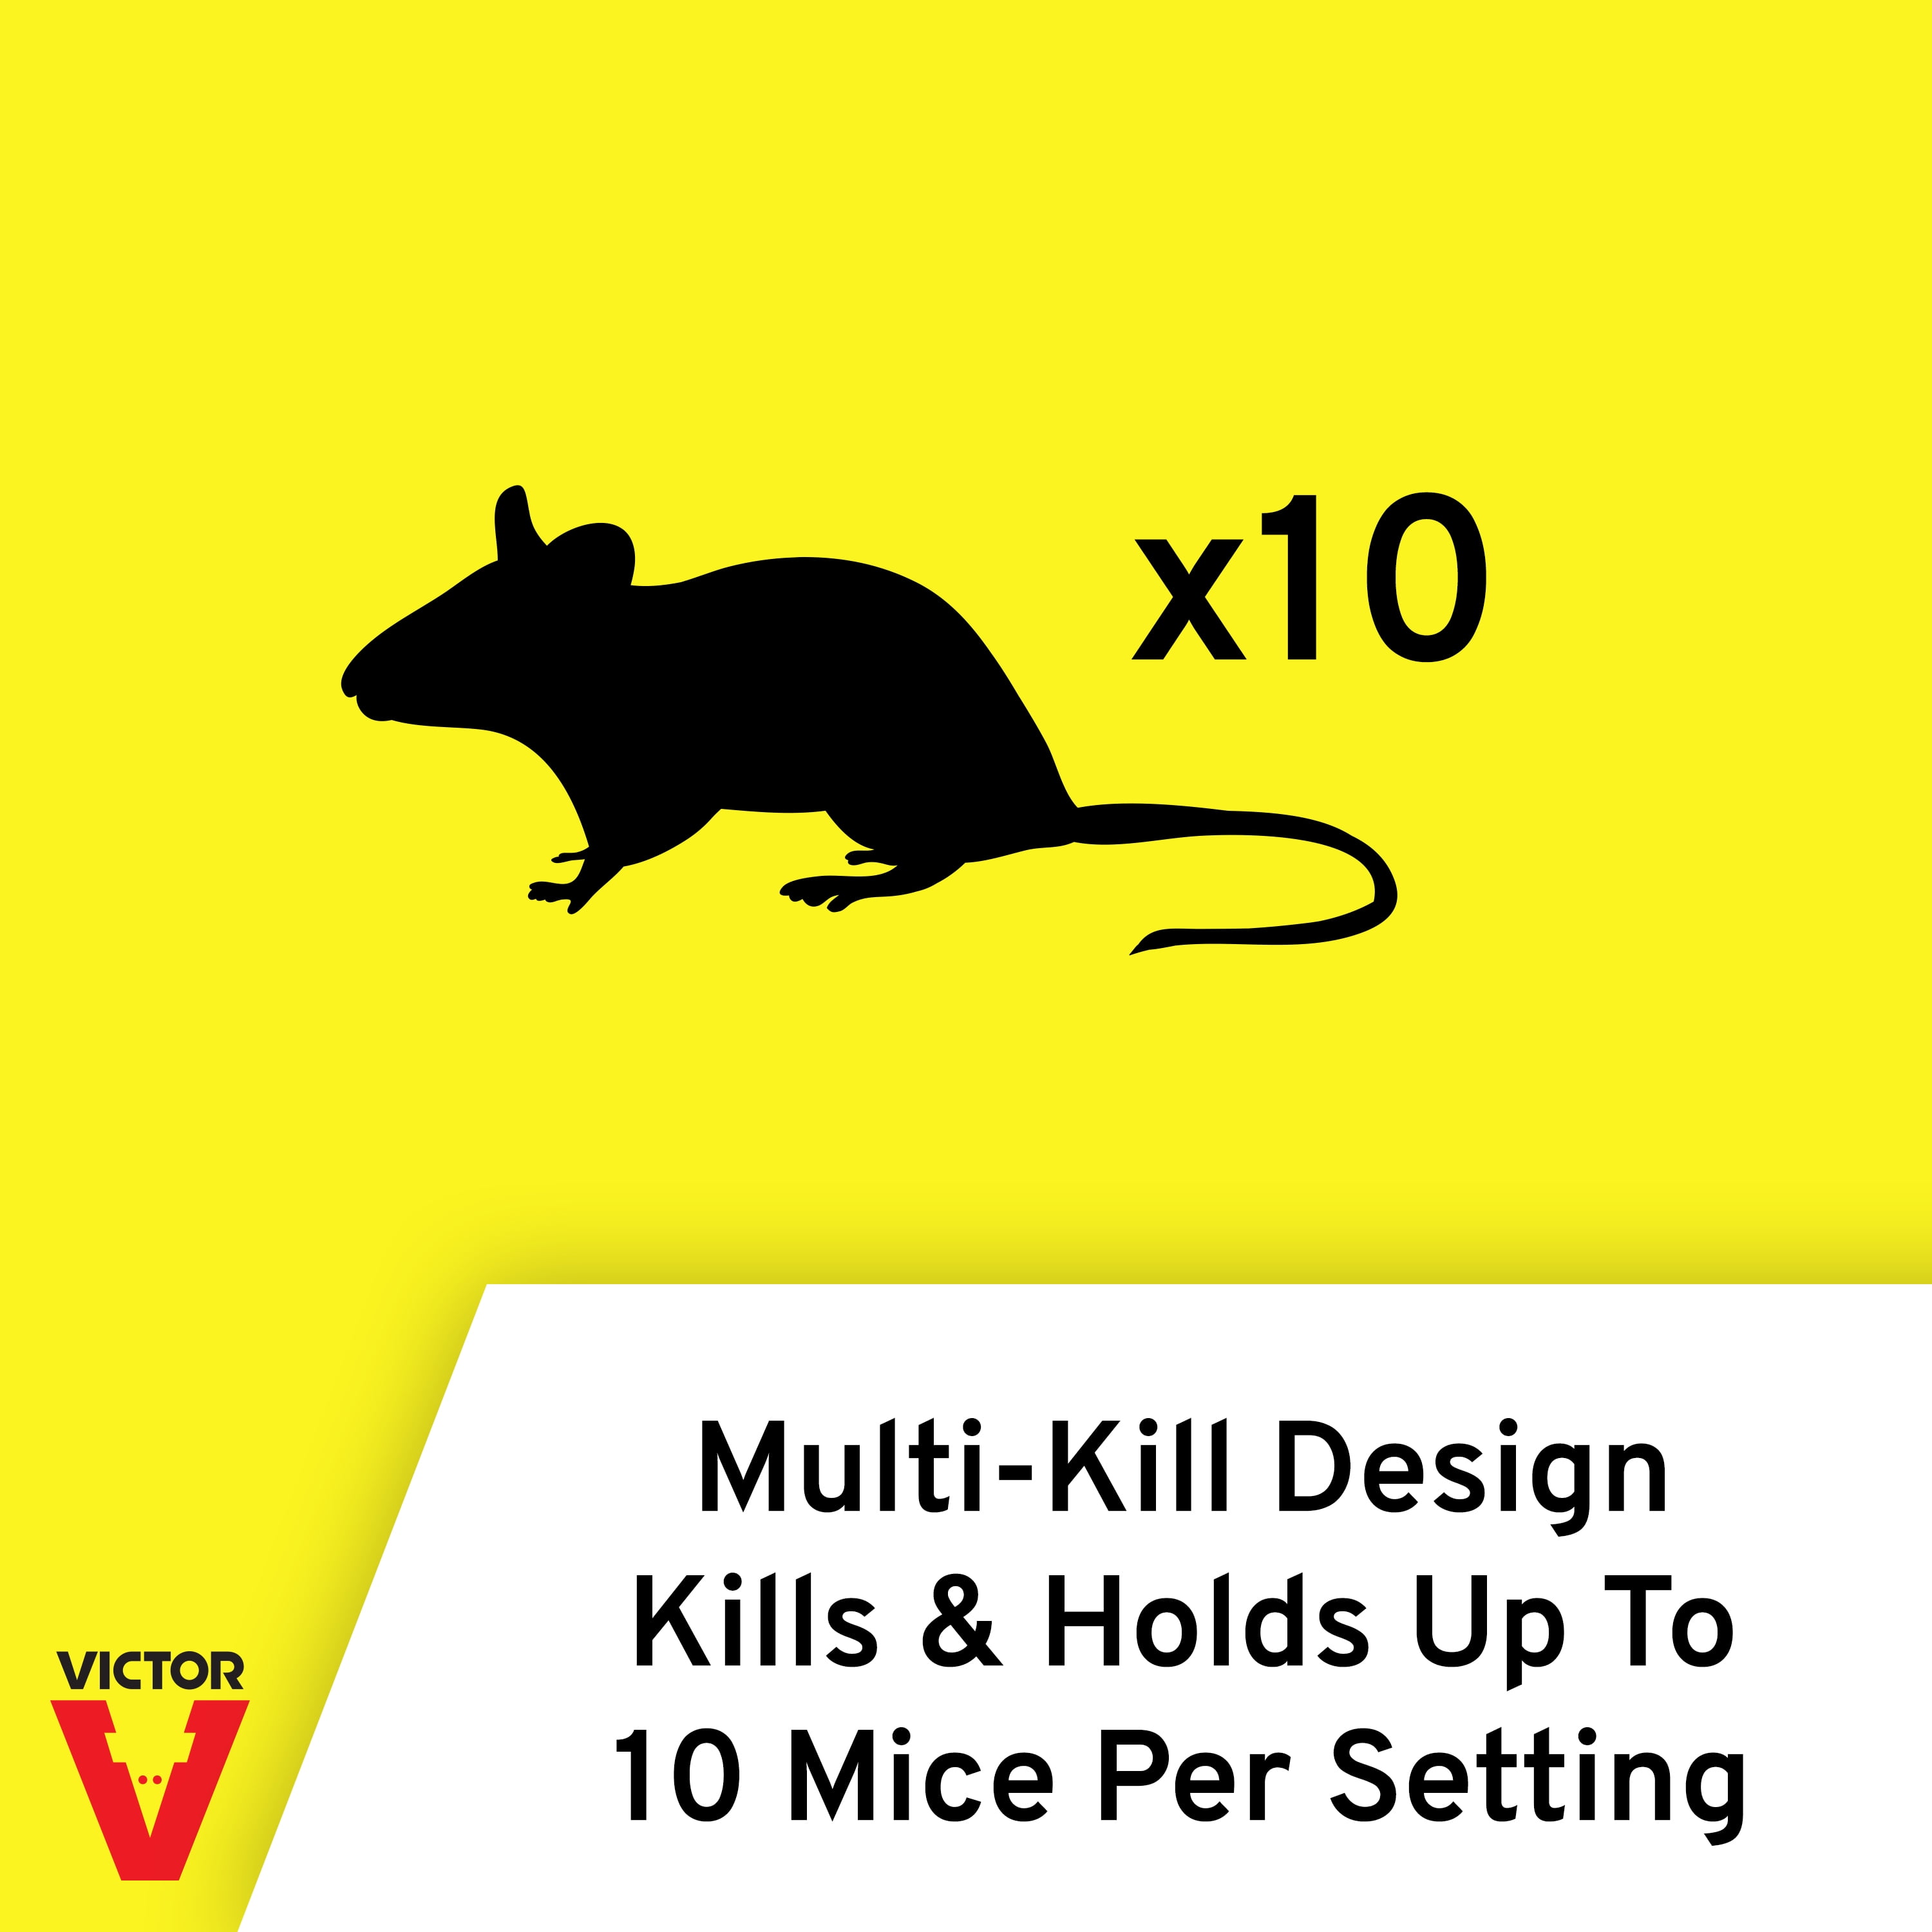 The Victor Multi-Kill Electric Mousetrap - Full Review. Mousetrap